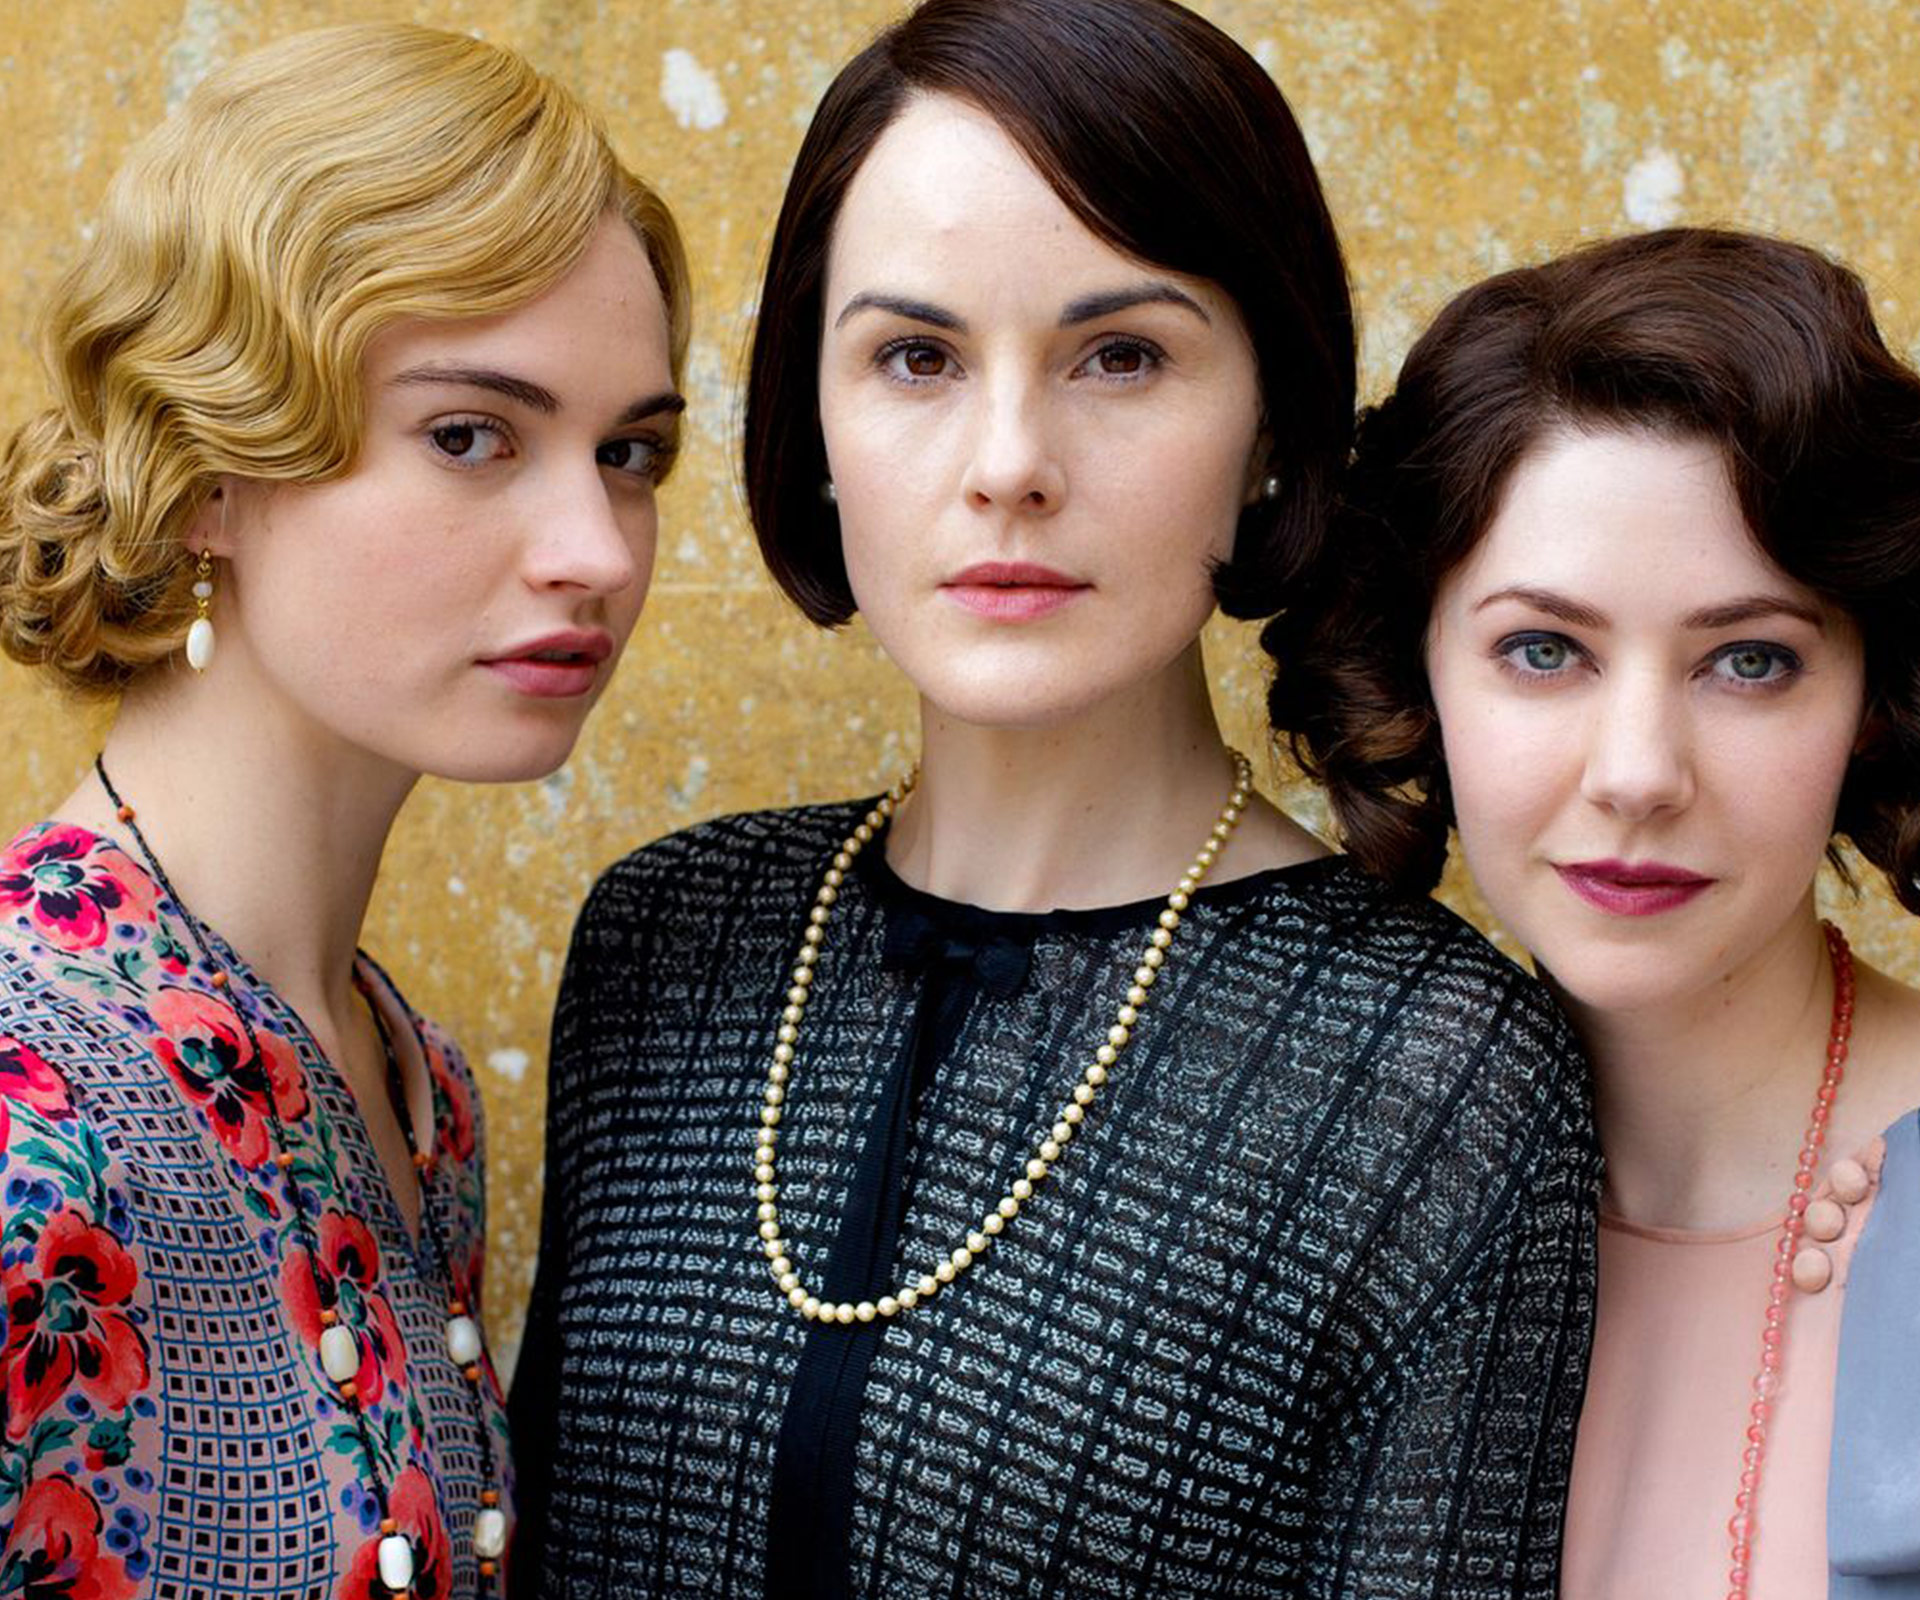 Downton Abbey unveils the new trailer for their final season